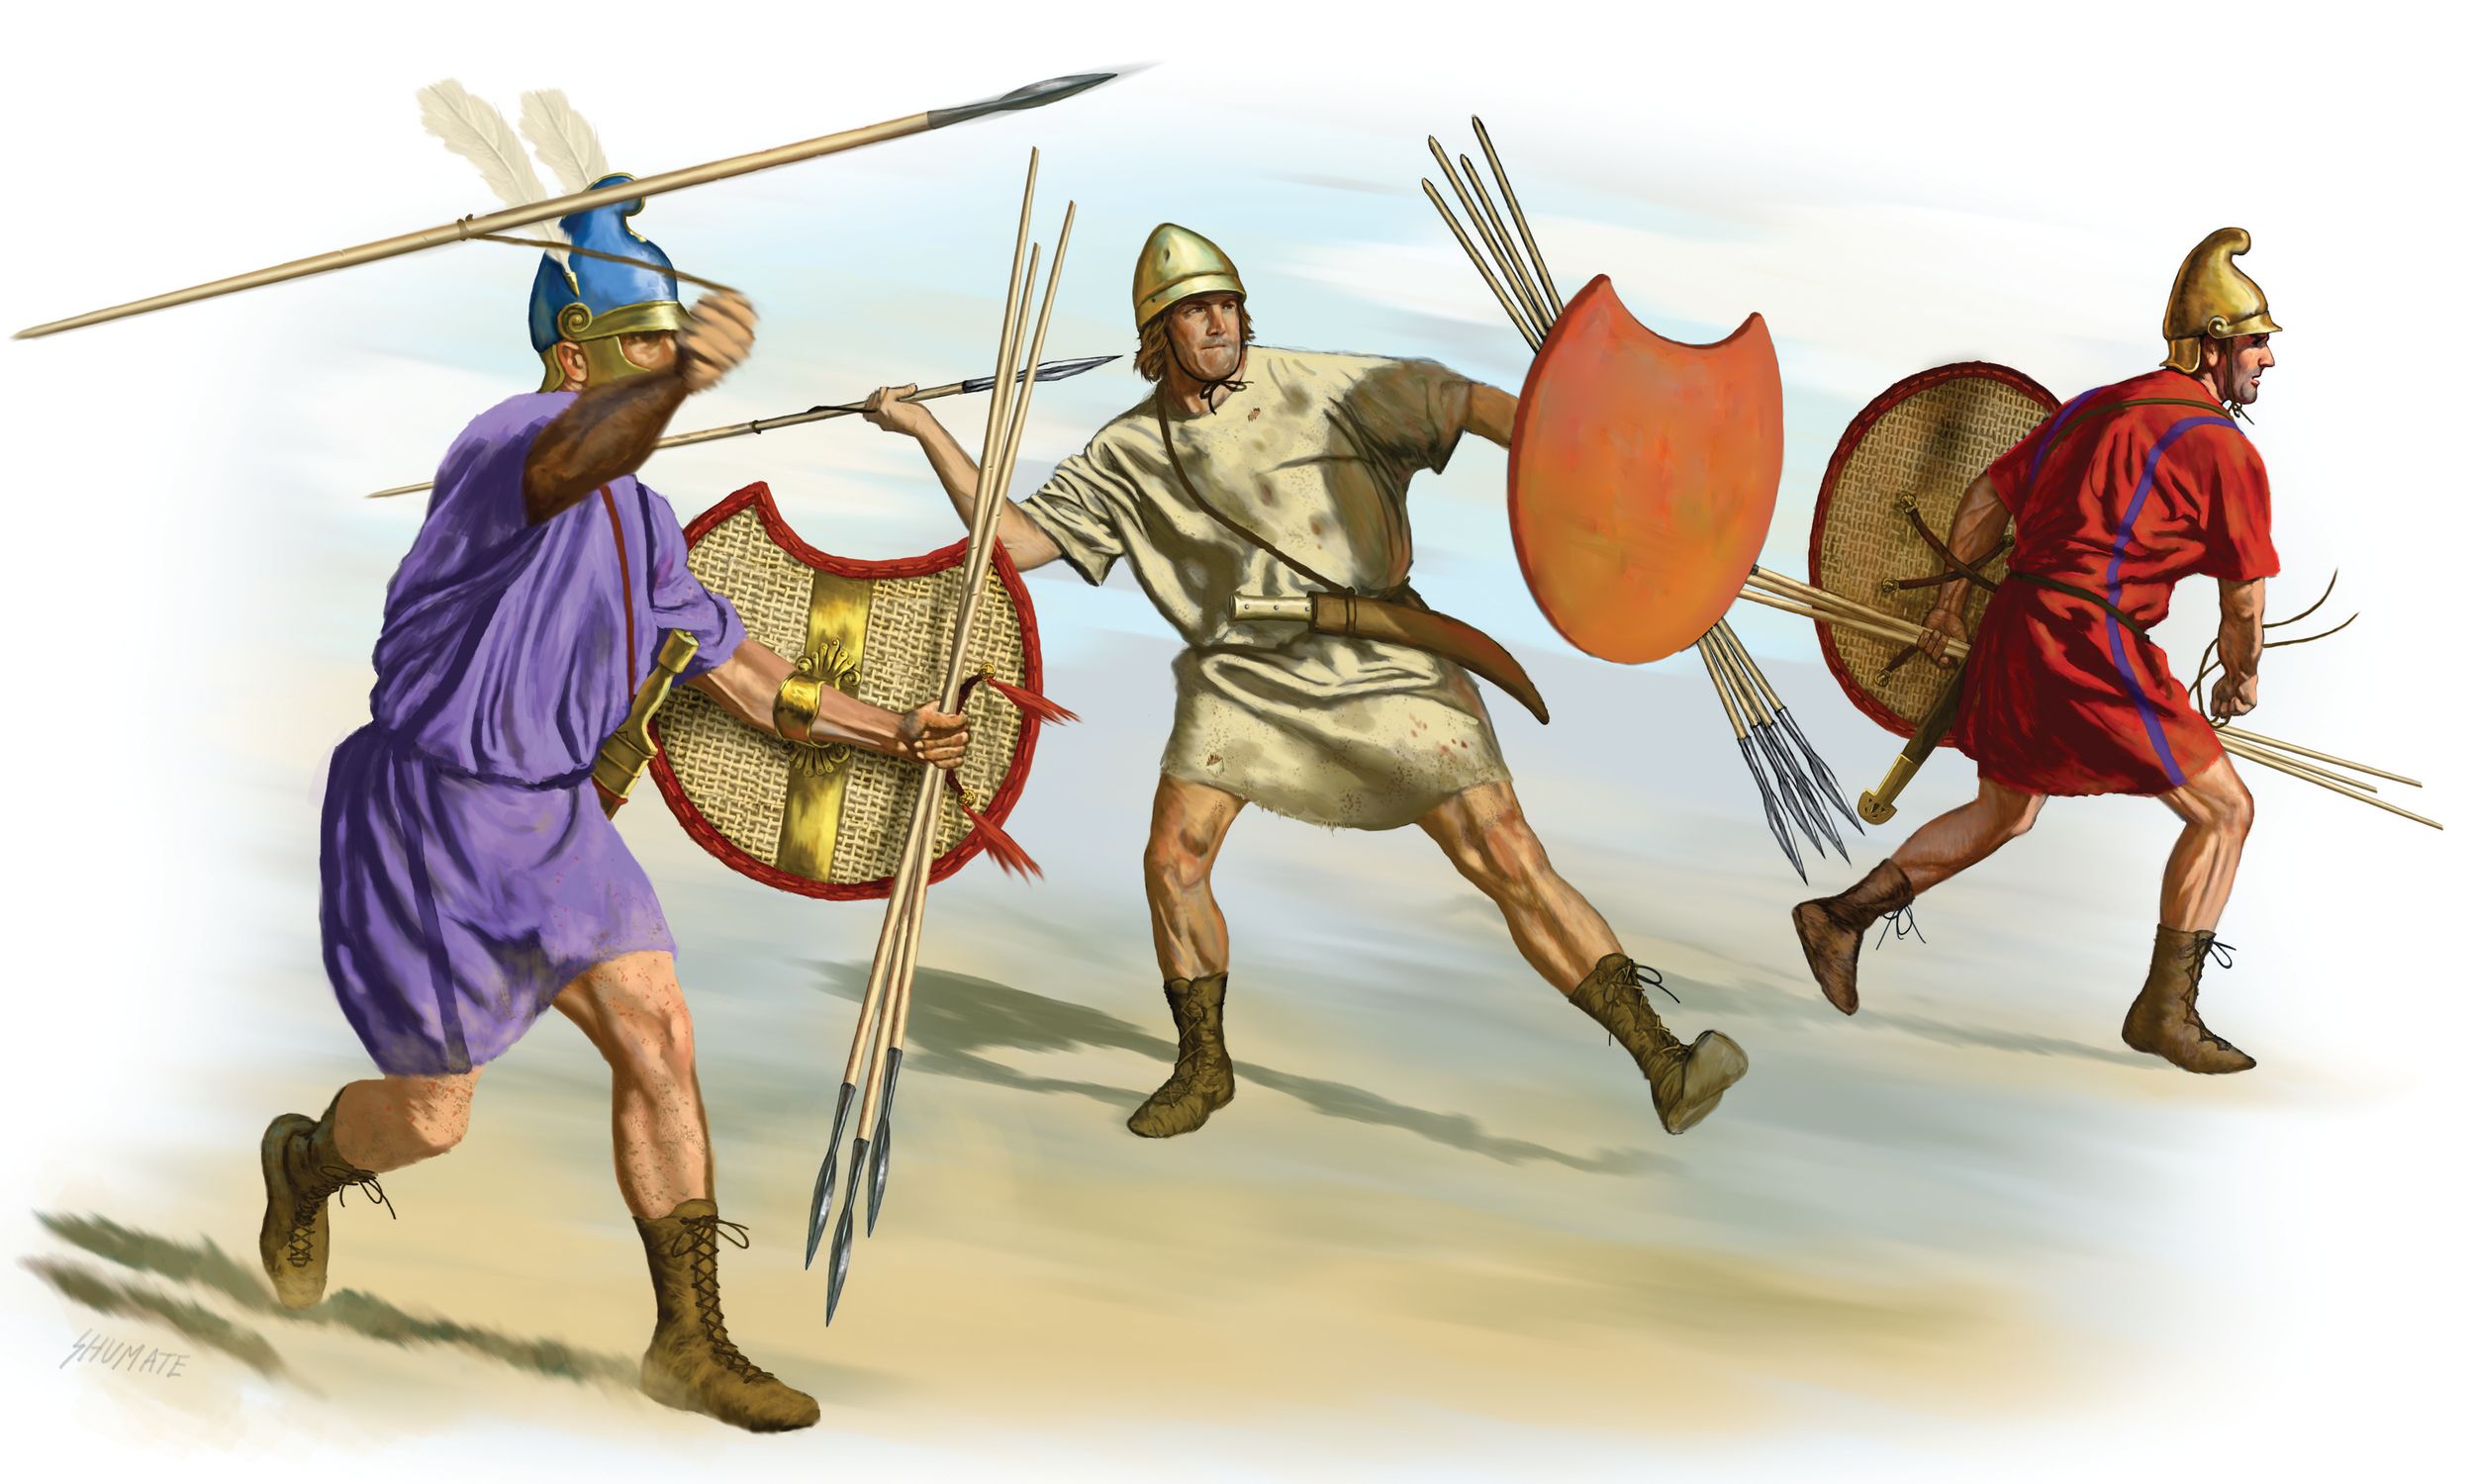 Athenian general Iphicrates modified the battle gear of his peltasts, shown in this Johnny Shumate illustration wearing lightweight linen instead of bronze armor and carrying half-moon shields, swords, and javelins.